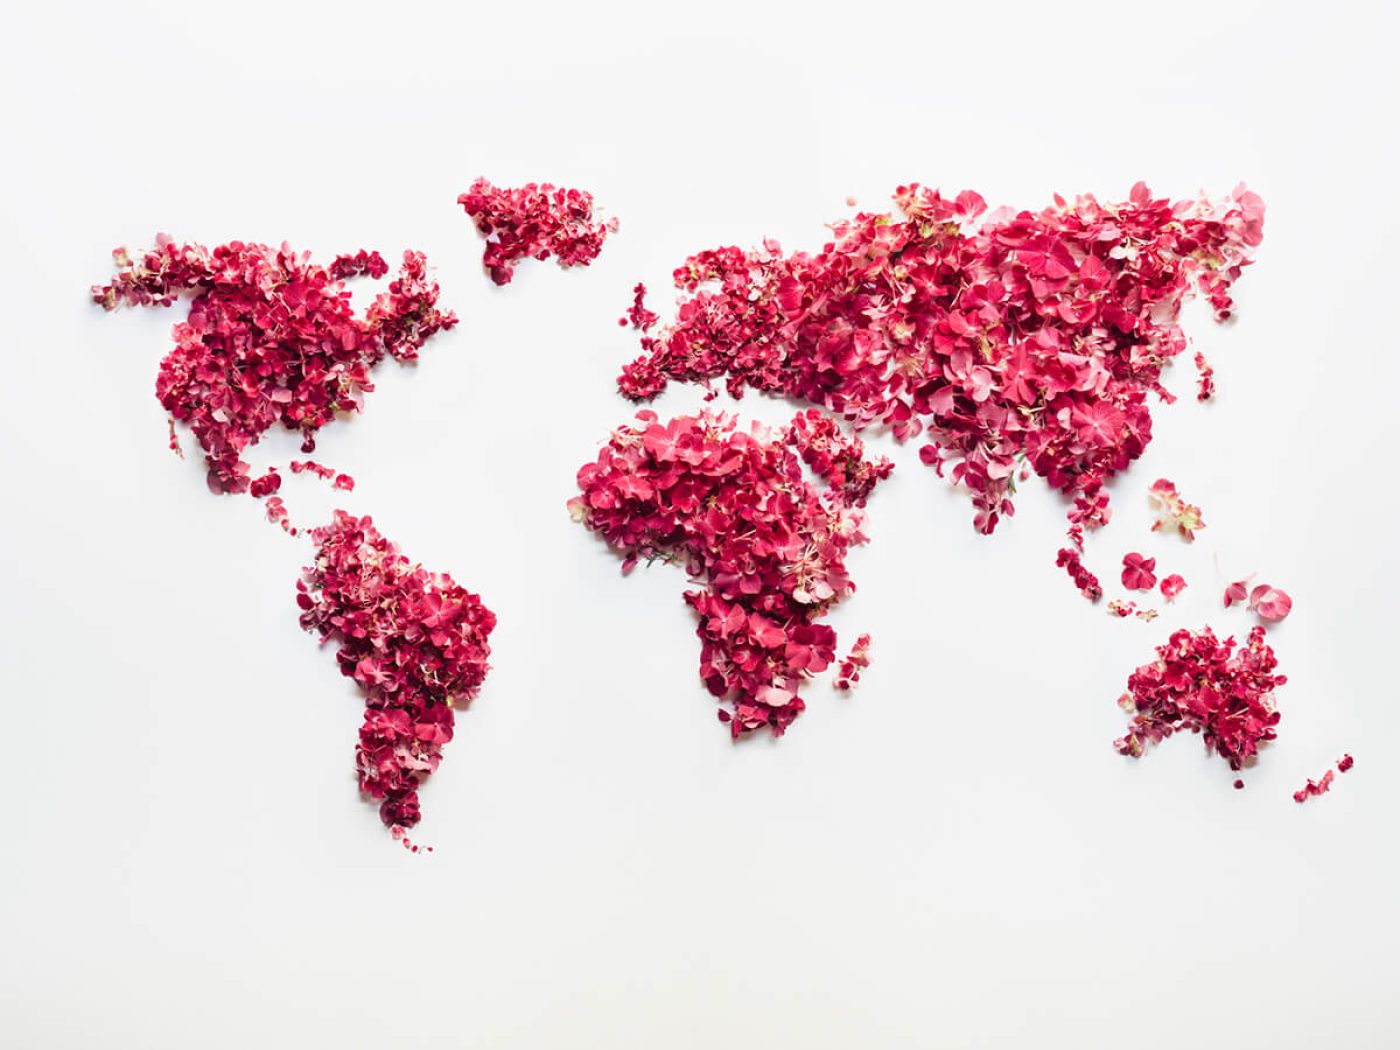 World map made up of pink petals with white background